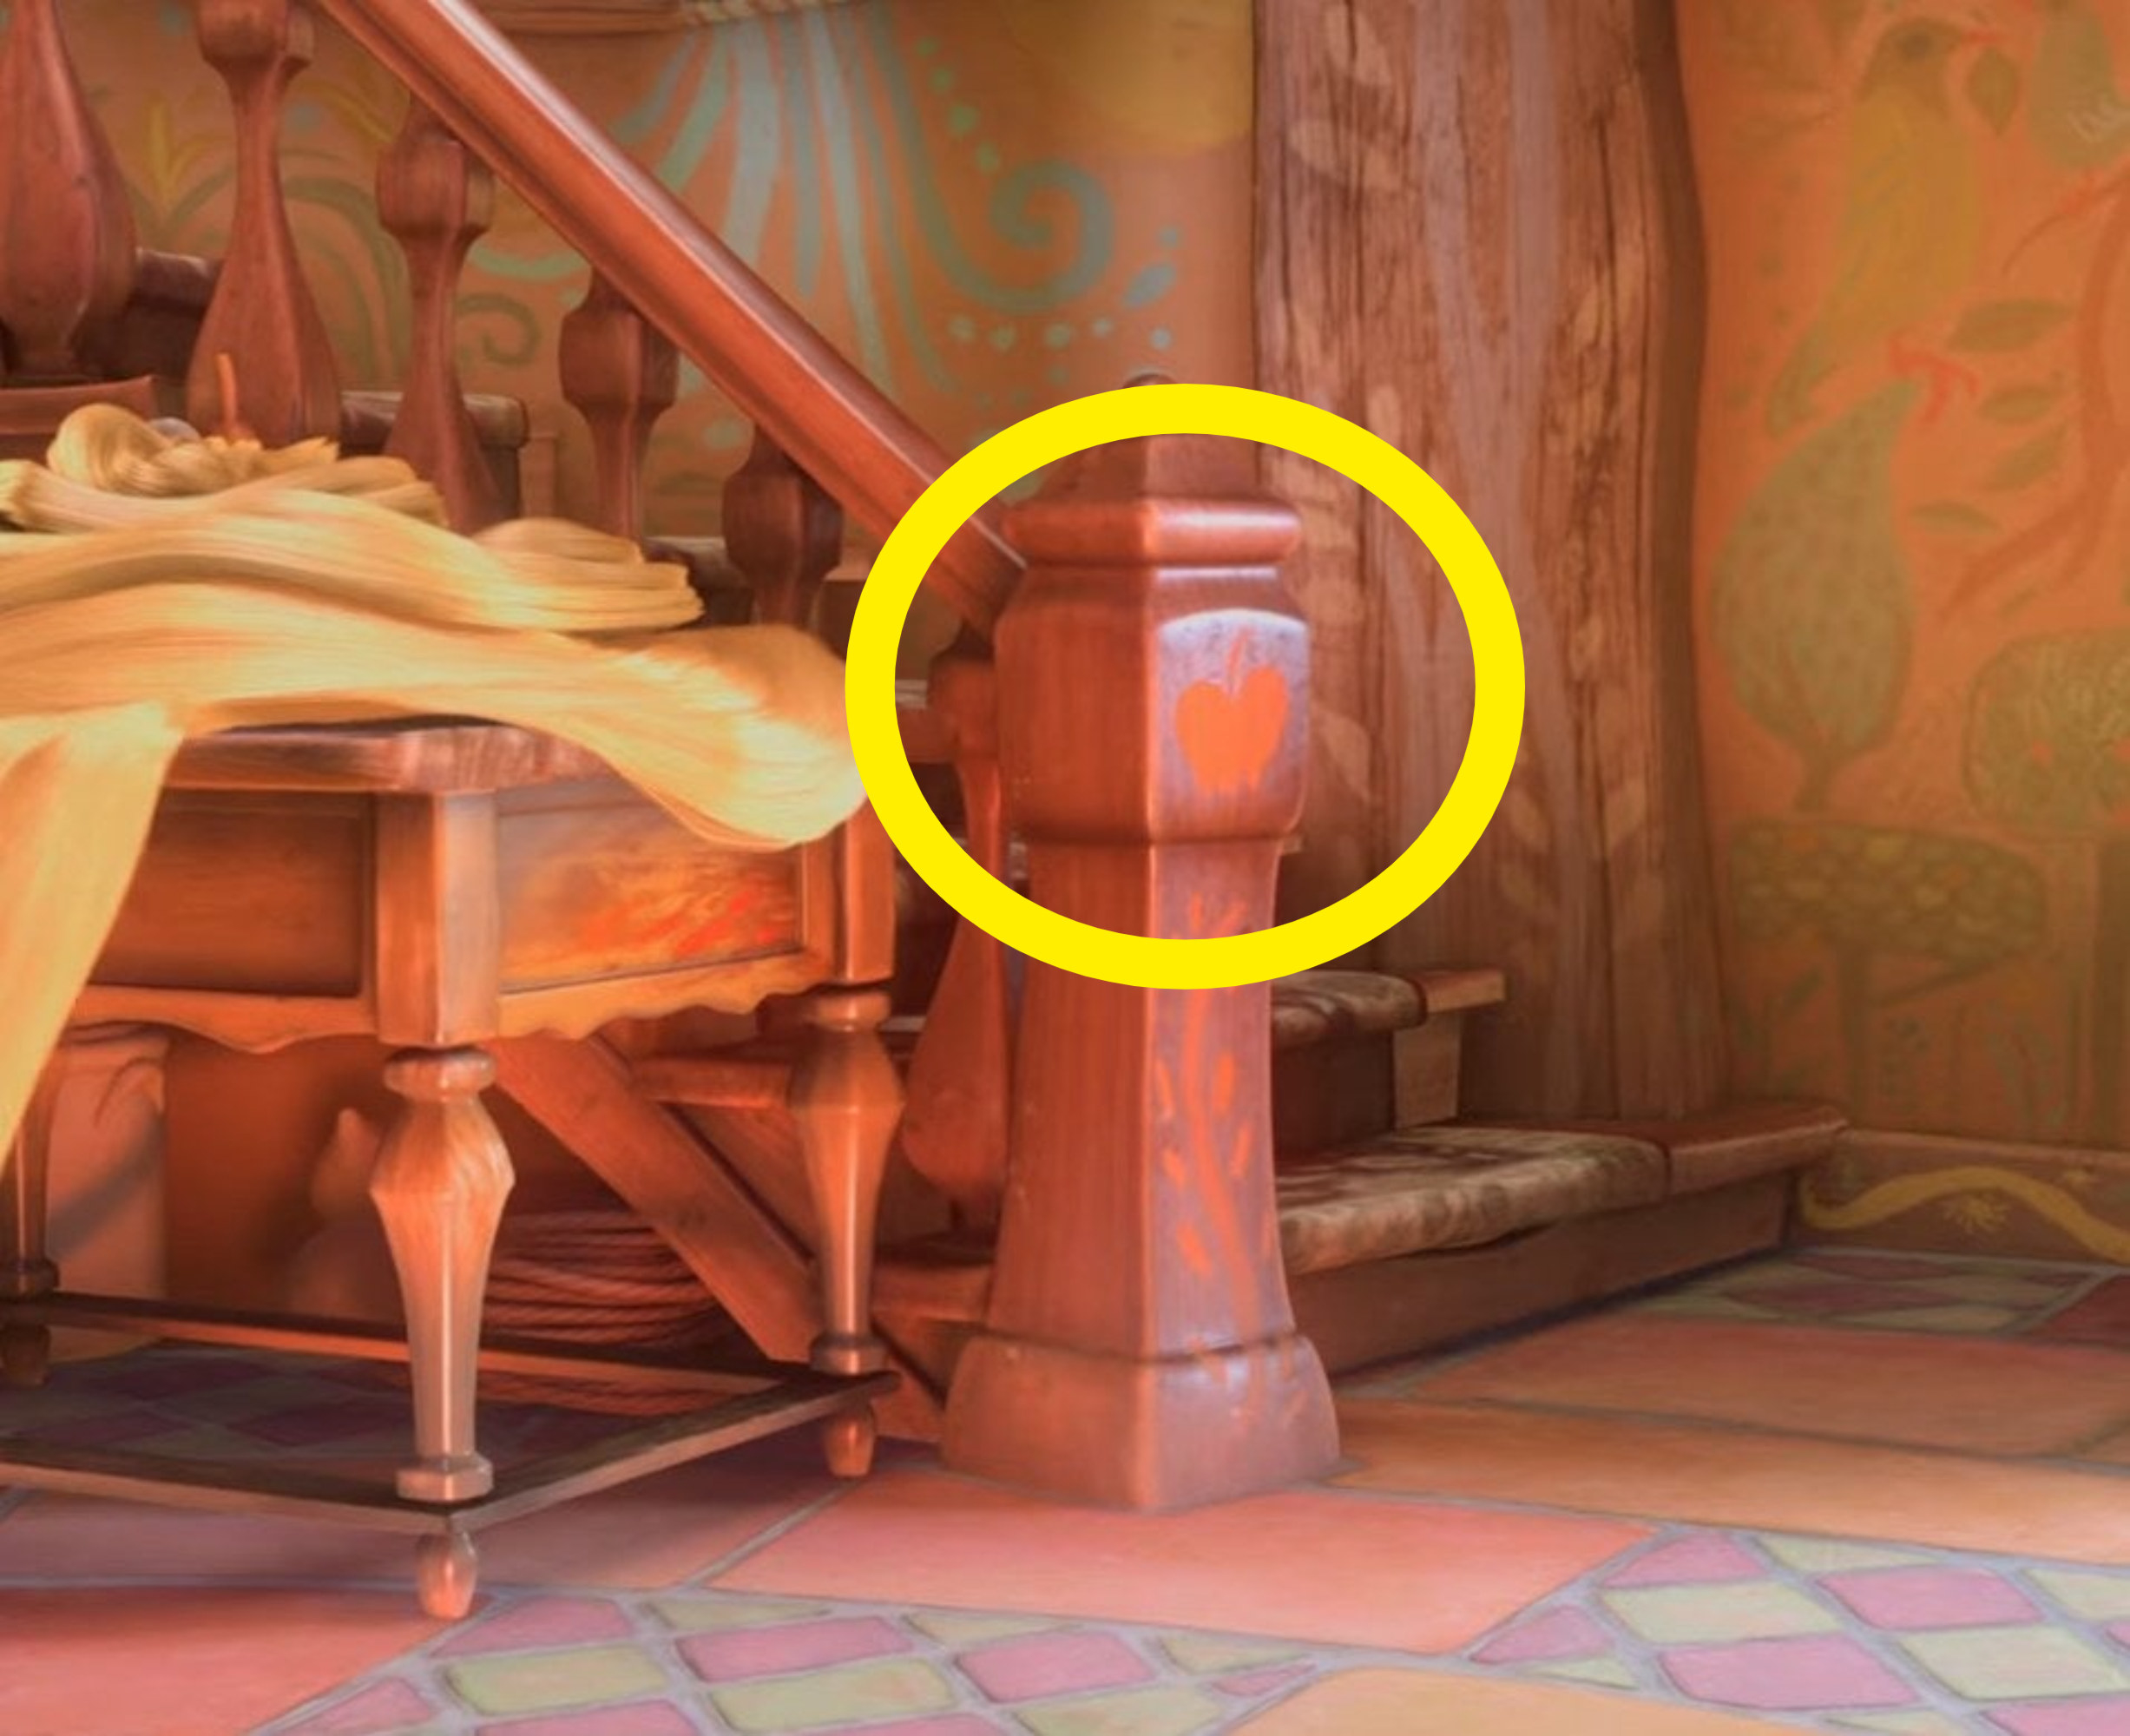 An apple painted on the staircase in Tangled, representing Snow White